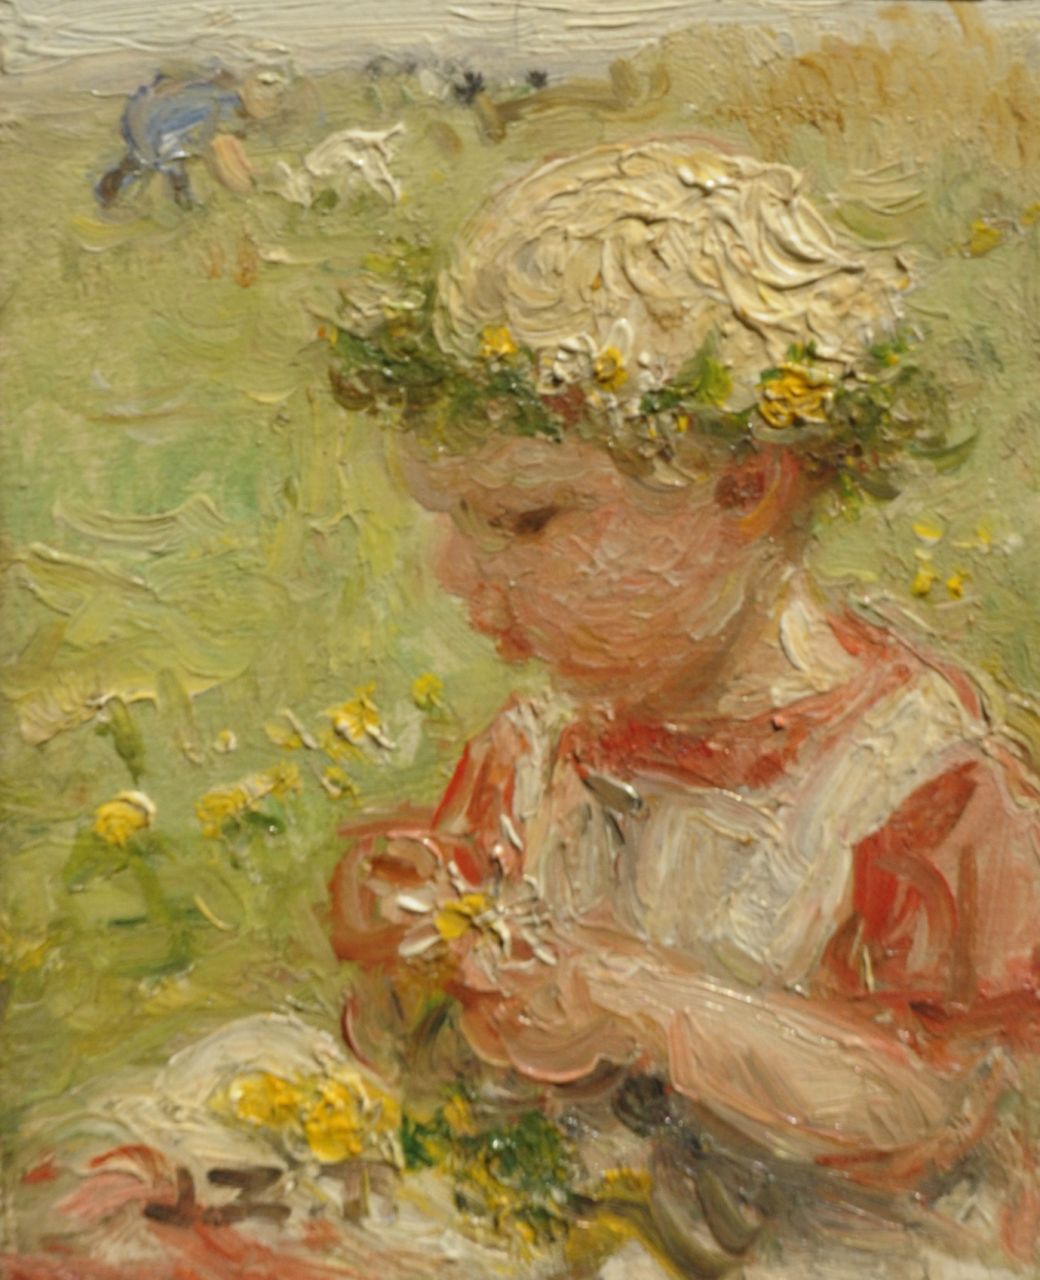 Zoetelief Tromp J.  | Johannes 'Jan' Zoetelief Tromp, Little girl picking flowers, Öl auf Holz 9,3 x 7,3 cm, signed l.l. with initials and in full on the reverse